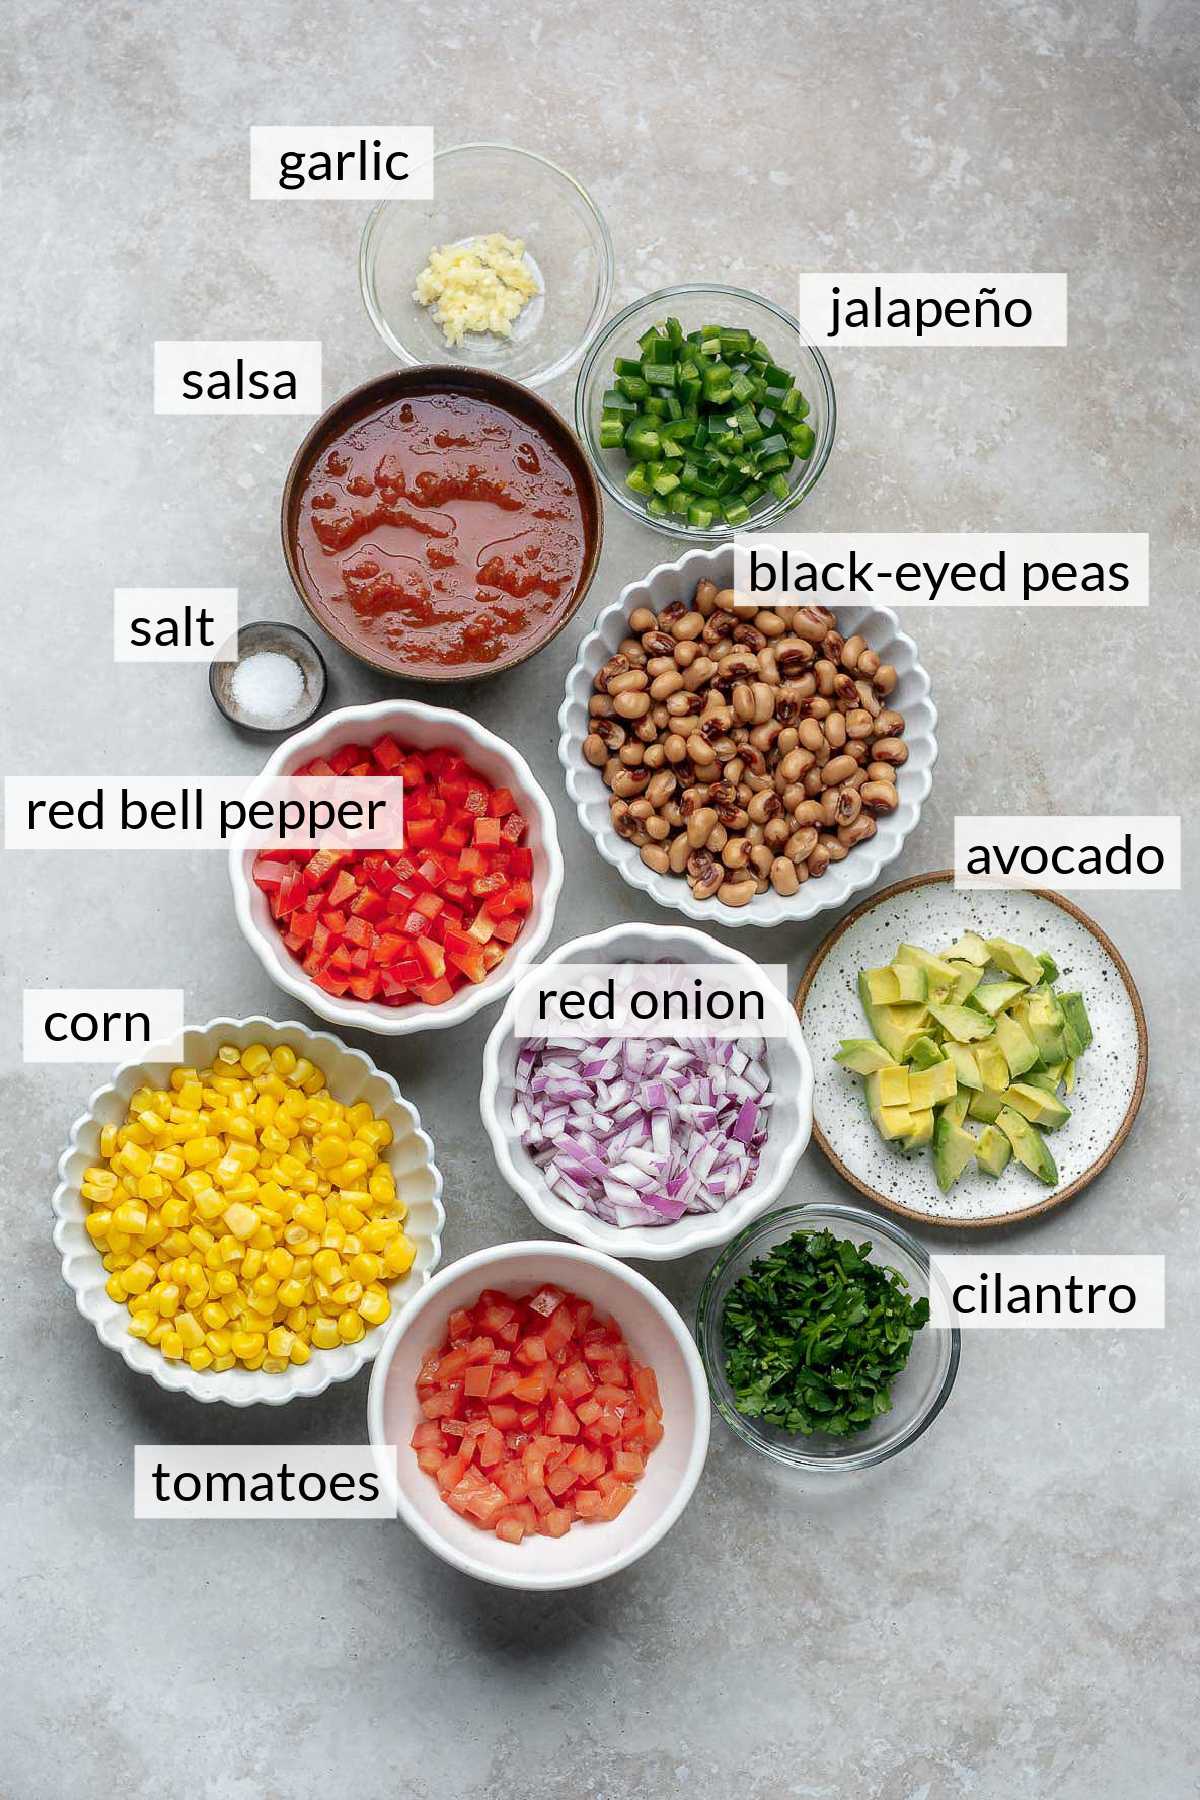 Black-eyed peas, salsa, avocado, corn, red onion and tomatoes divided into small bowls.